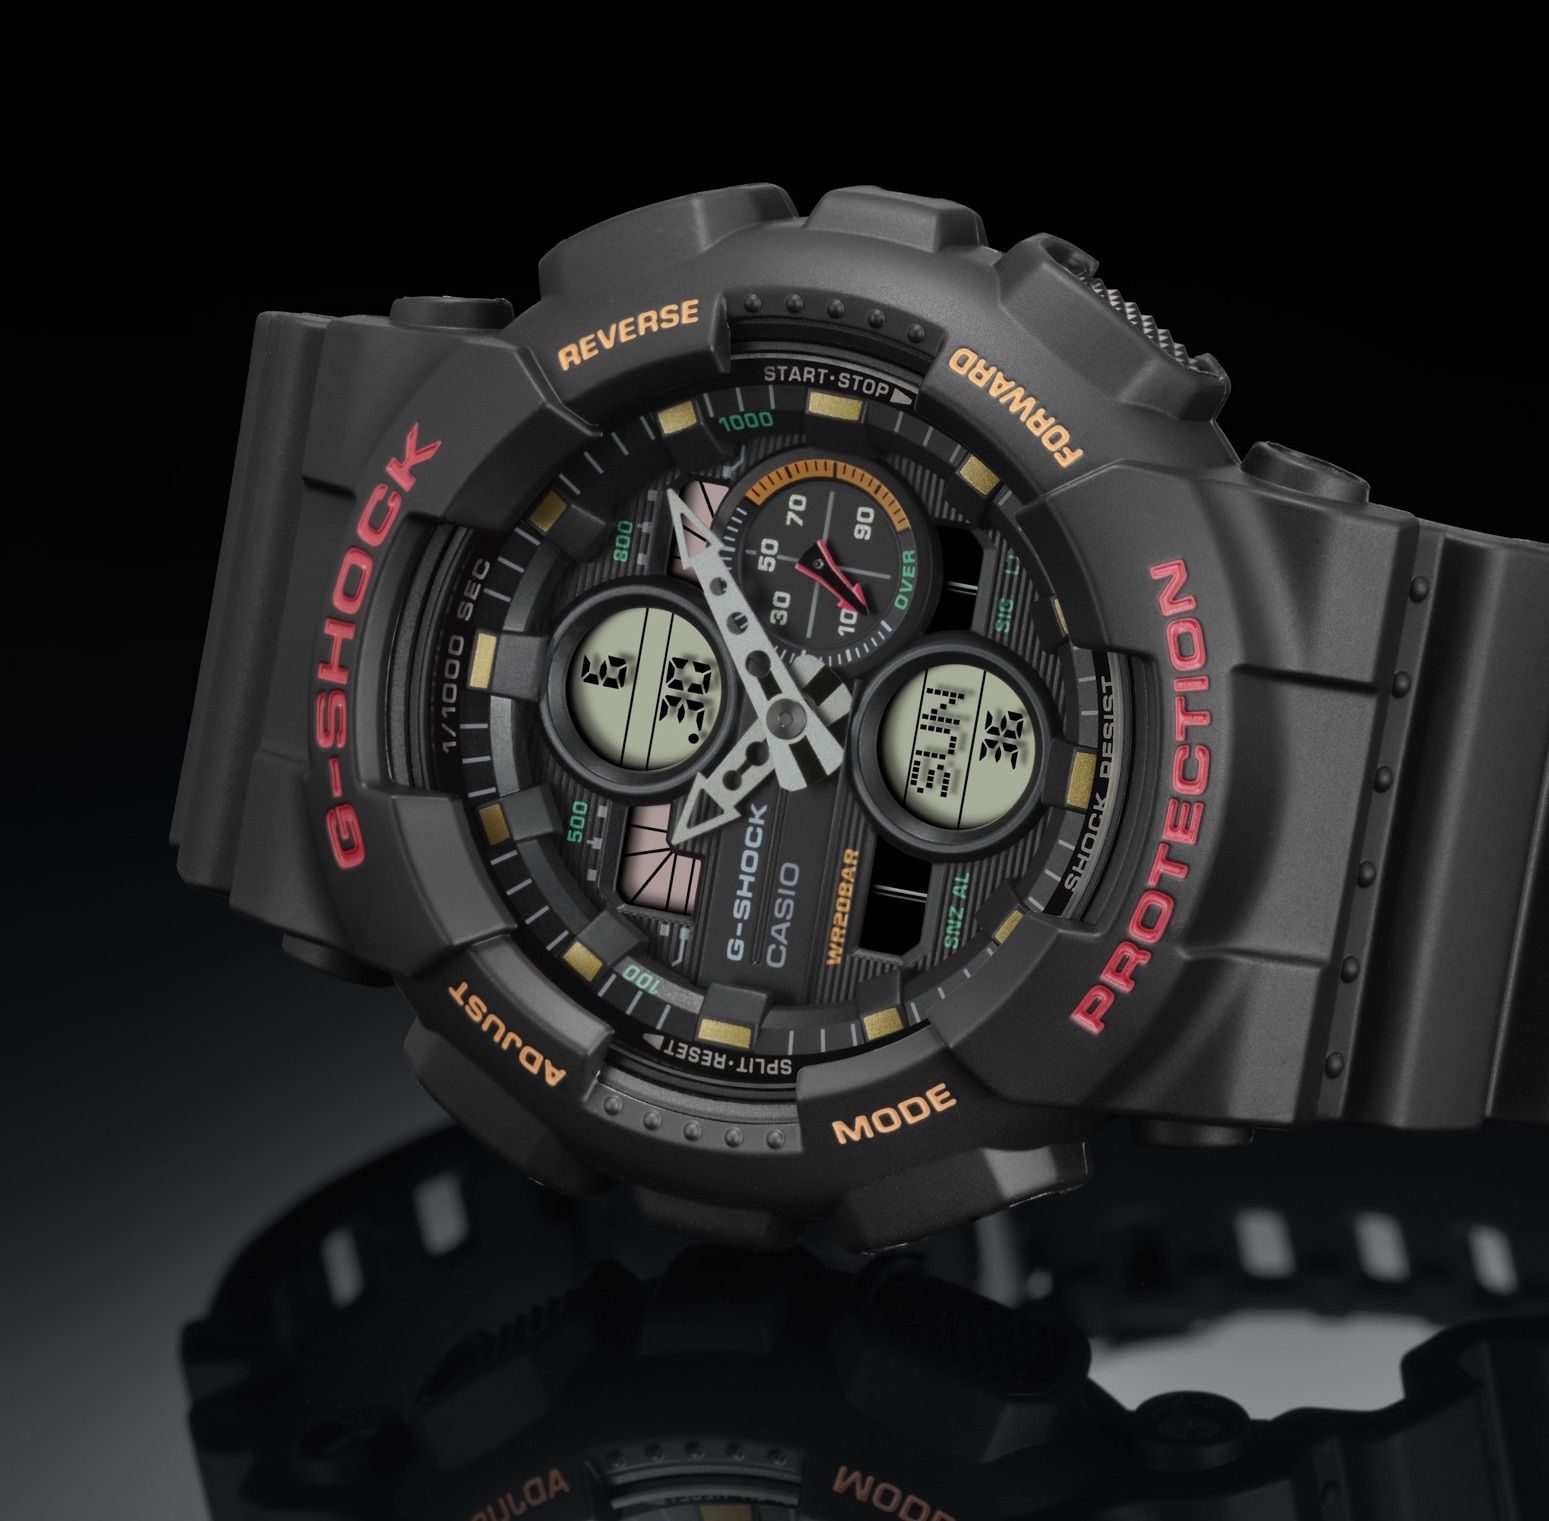 G-Shock Launches the GA-140 Series, a Collection of Analog-Digital 